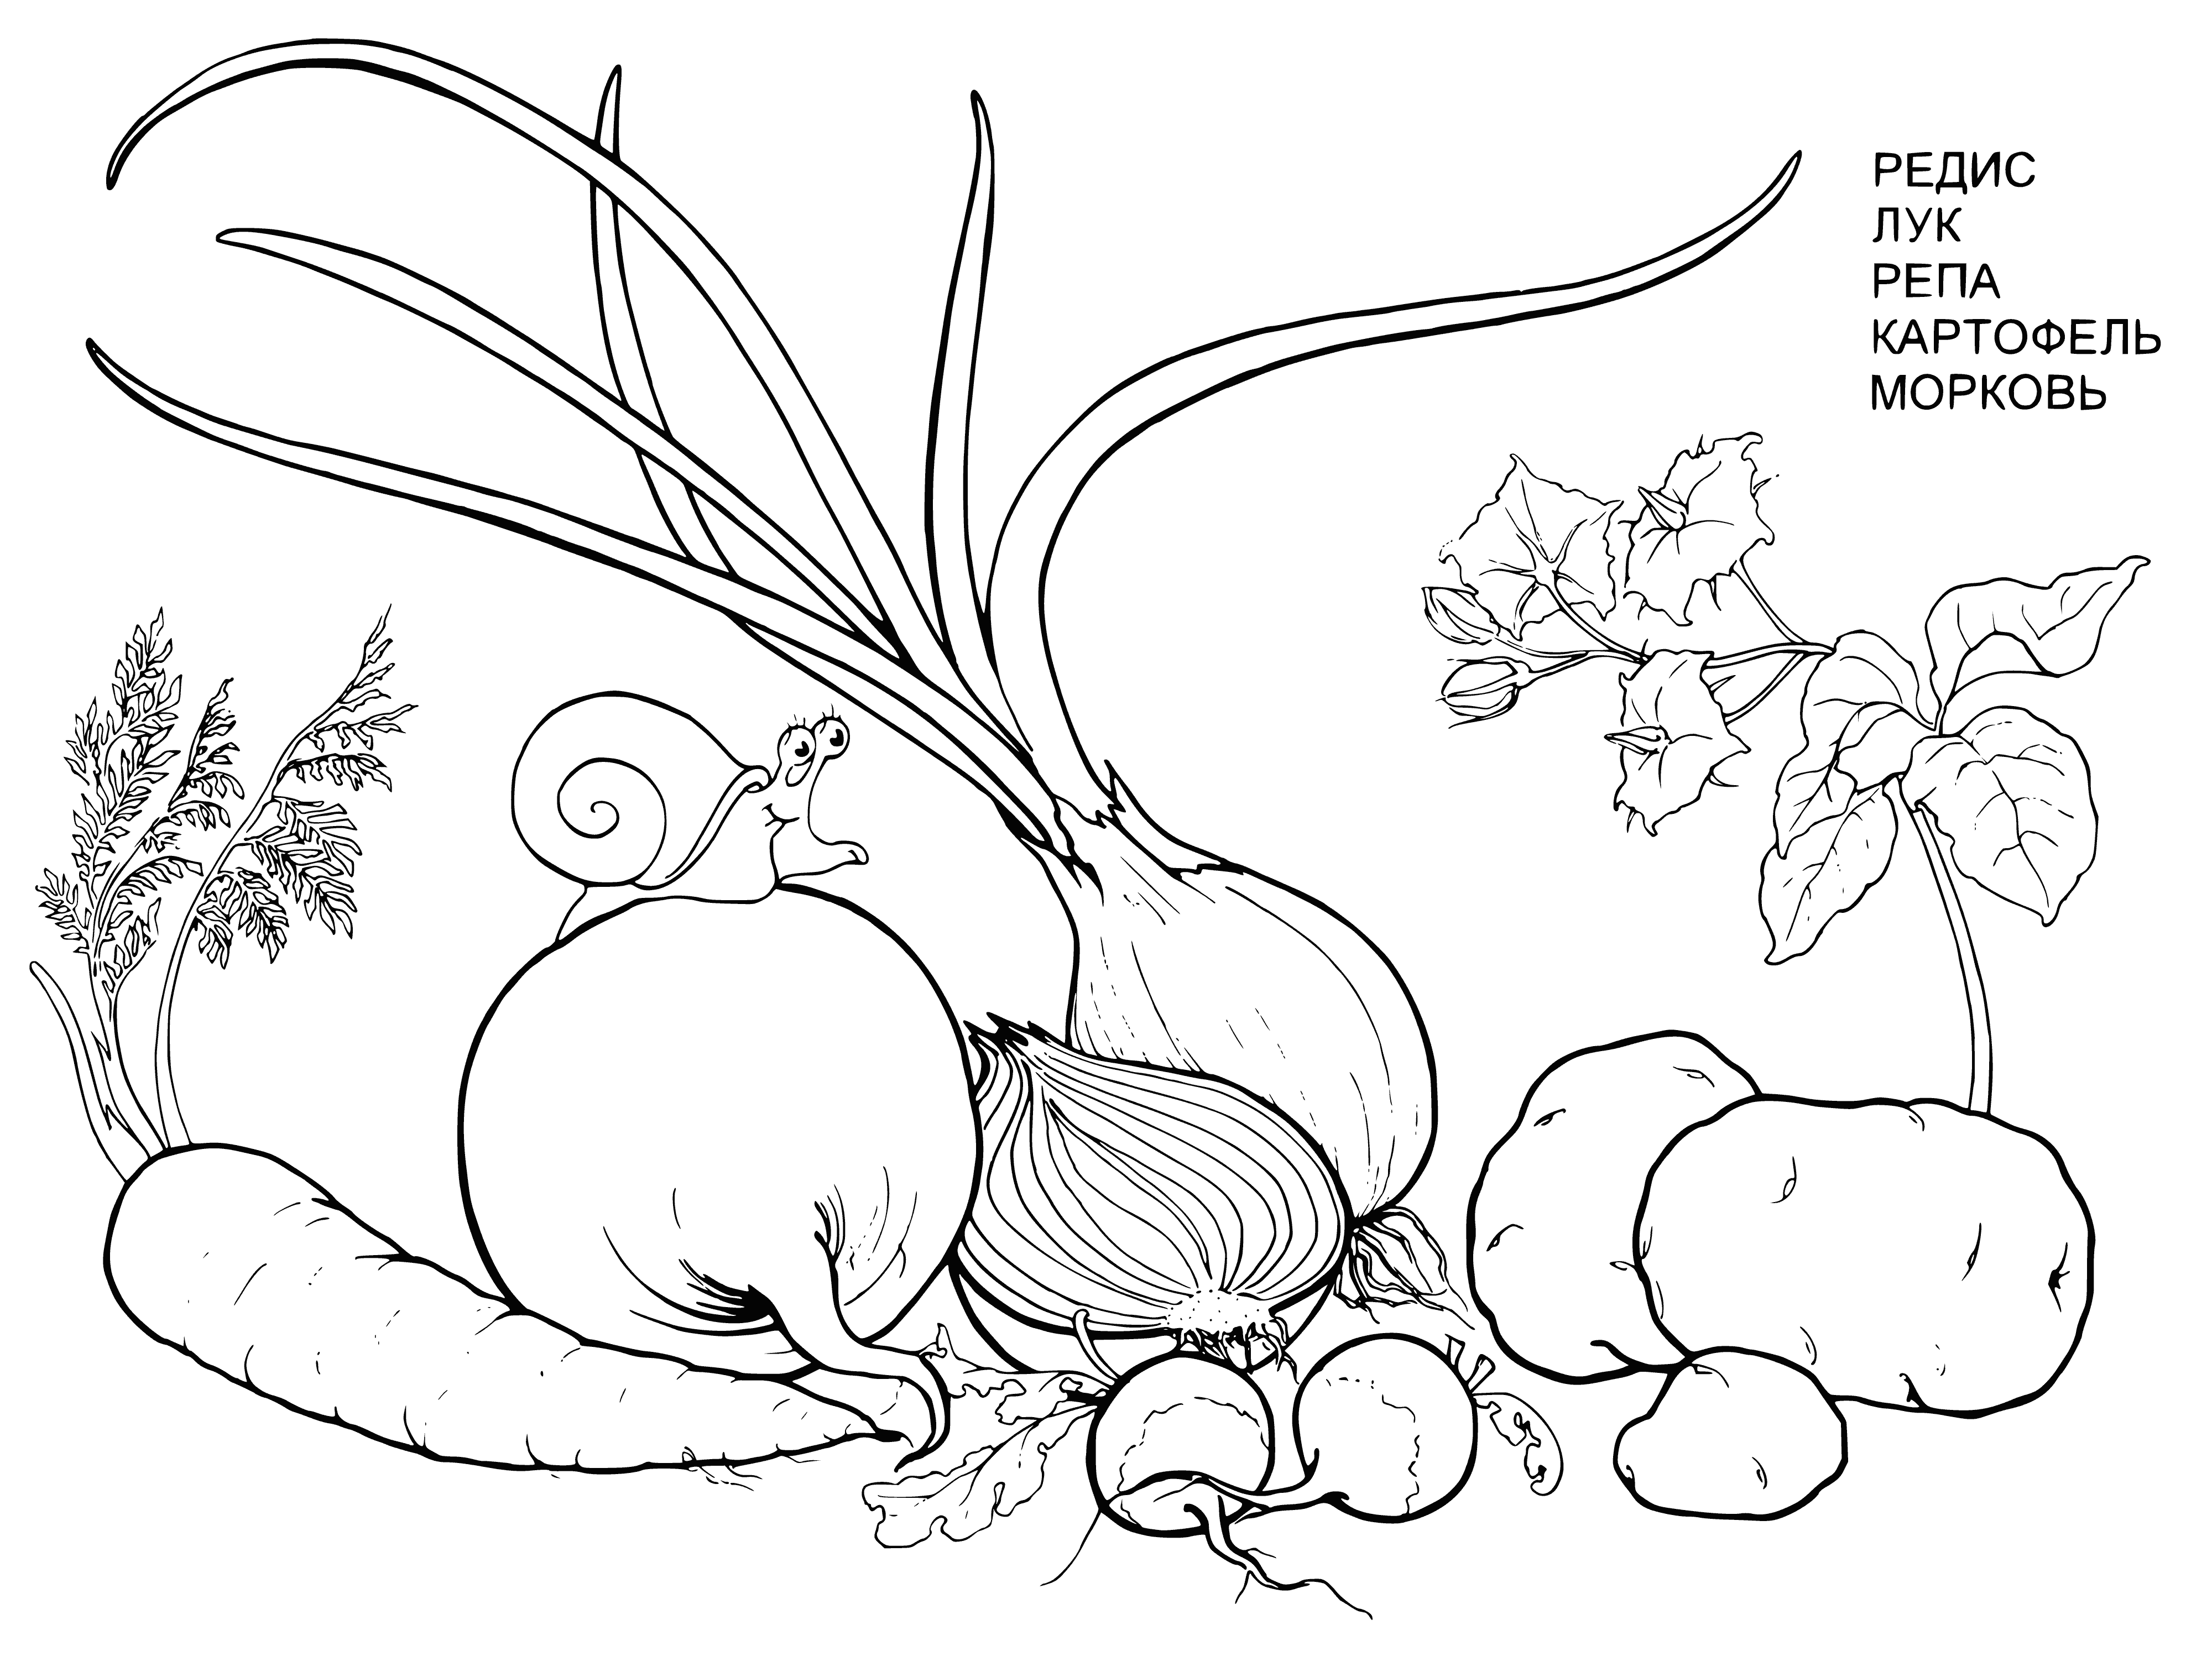 Vegetables from the garden coloring page